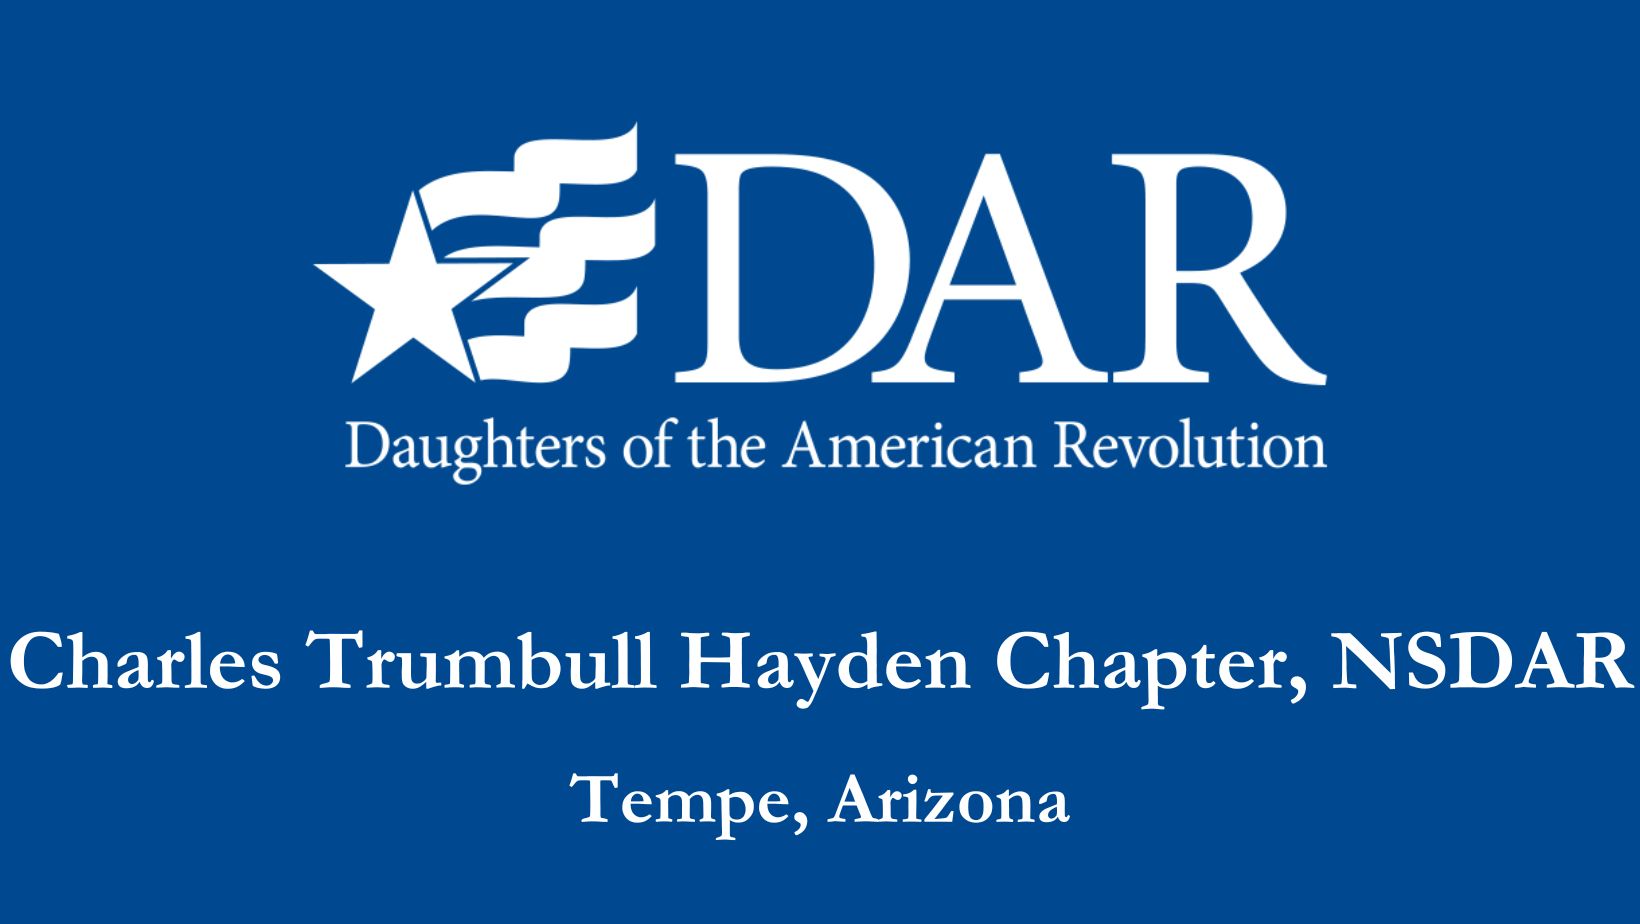 The site title for Charles Trumbull Hayden Chapter, NSDAR, with the DAR logo